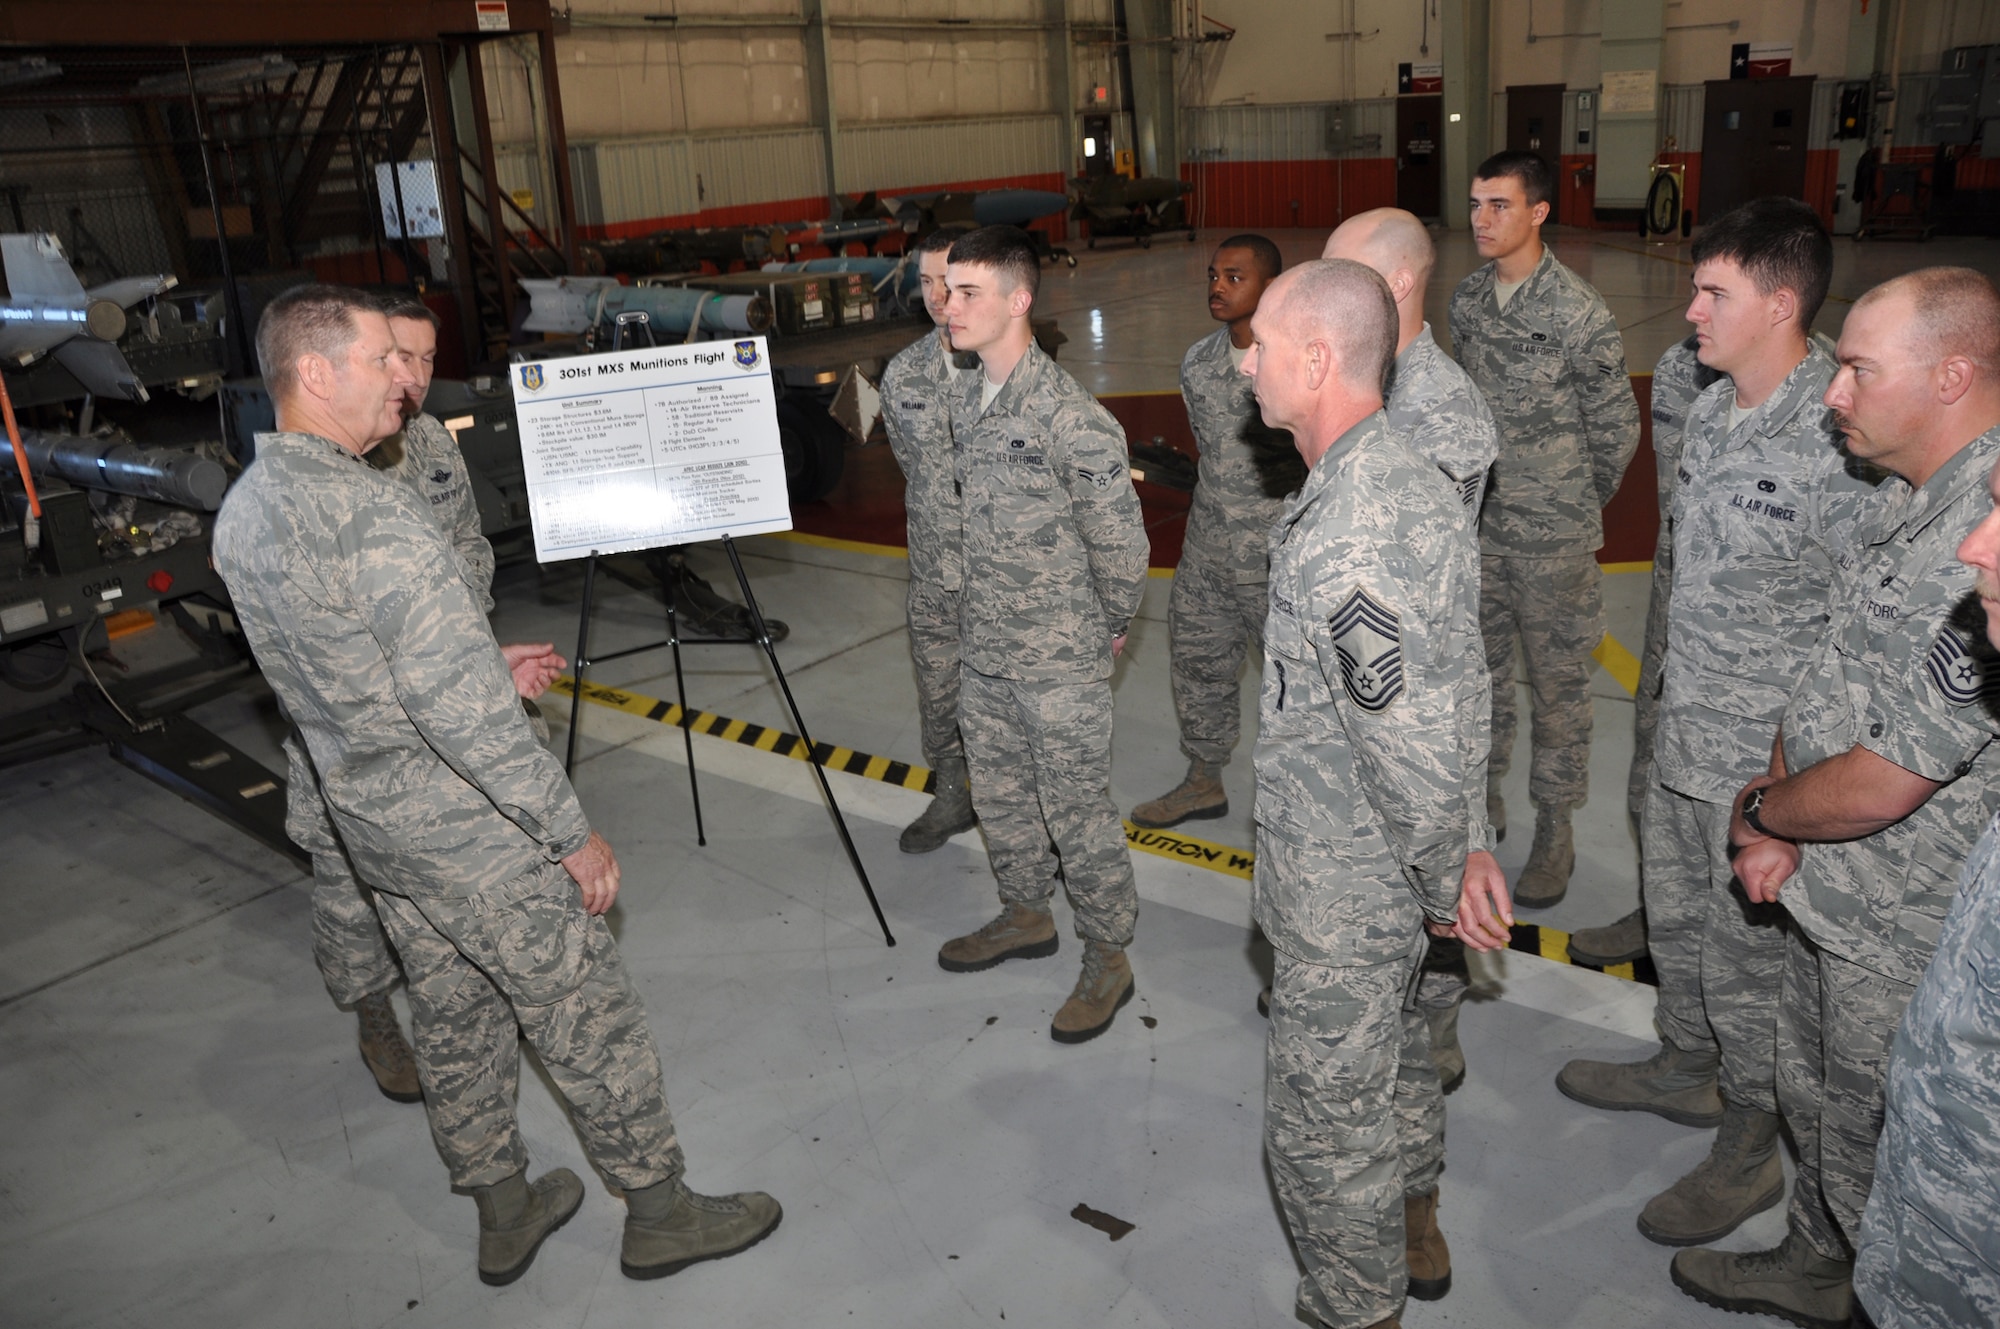 The 12th AF commander toured various areas of the 301st Fighter Wing visiting with Airmen and listening to their questions about the current state of affairs. Some Airmen recieved personal kudos from Lt Gen Rand for their superior performance.